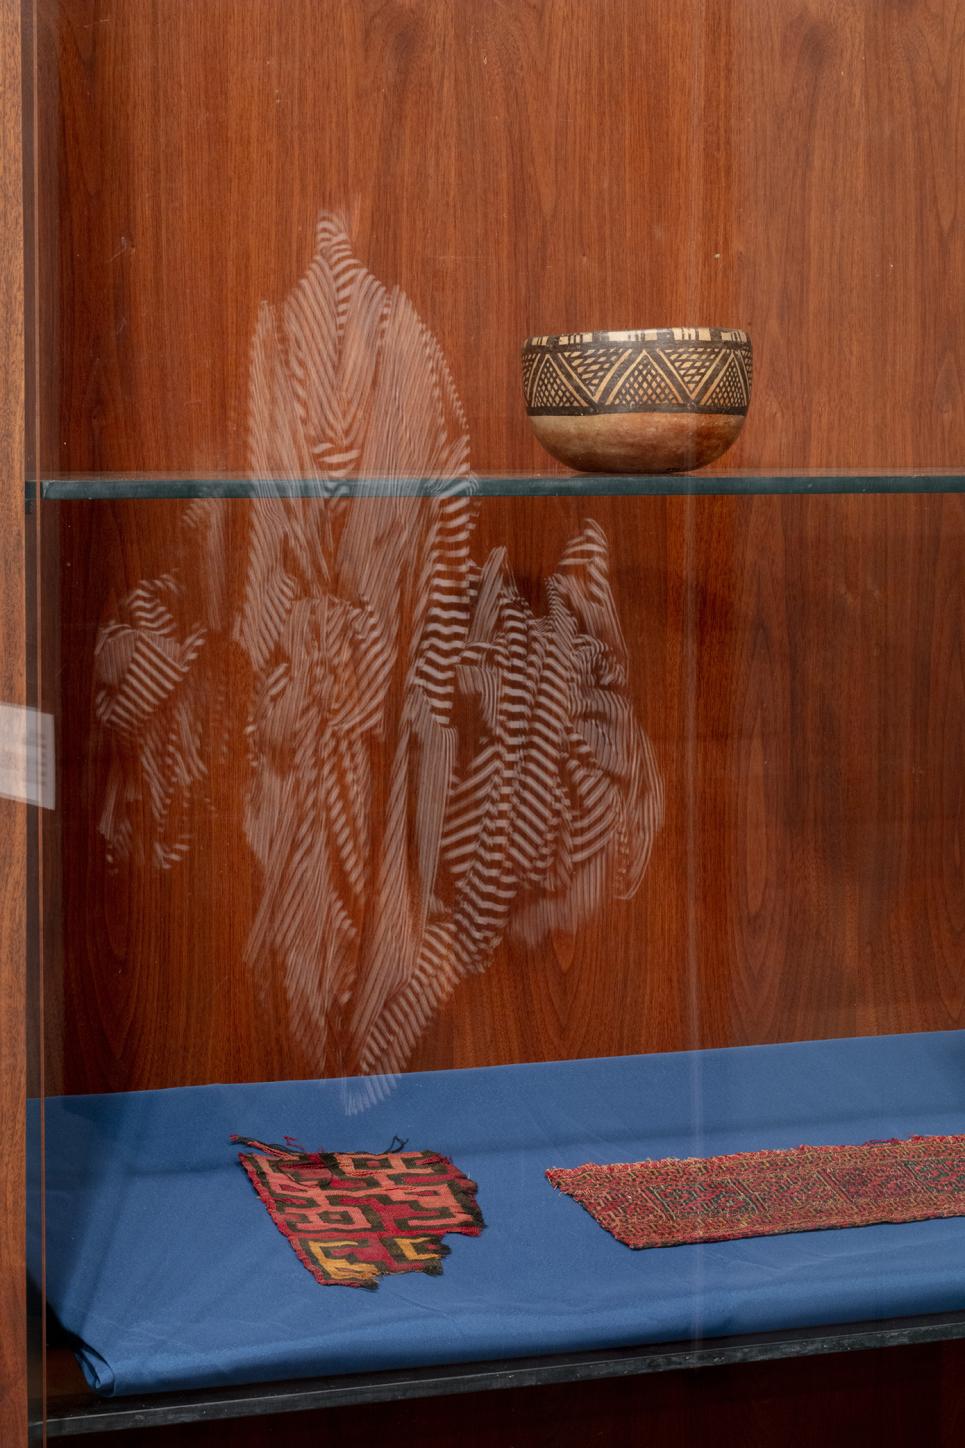 View of Peruvian textiles with reflection of The Dorsal, Not at Home exhibition